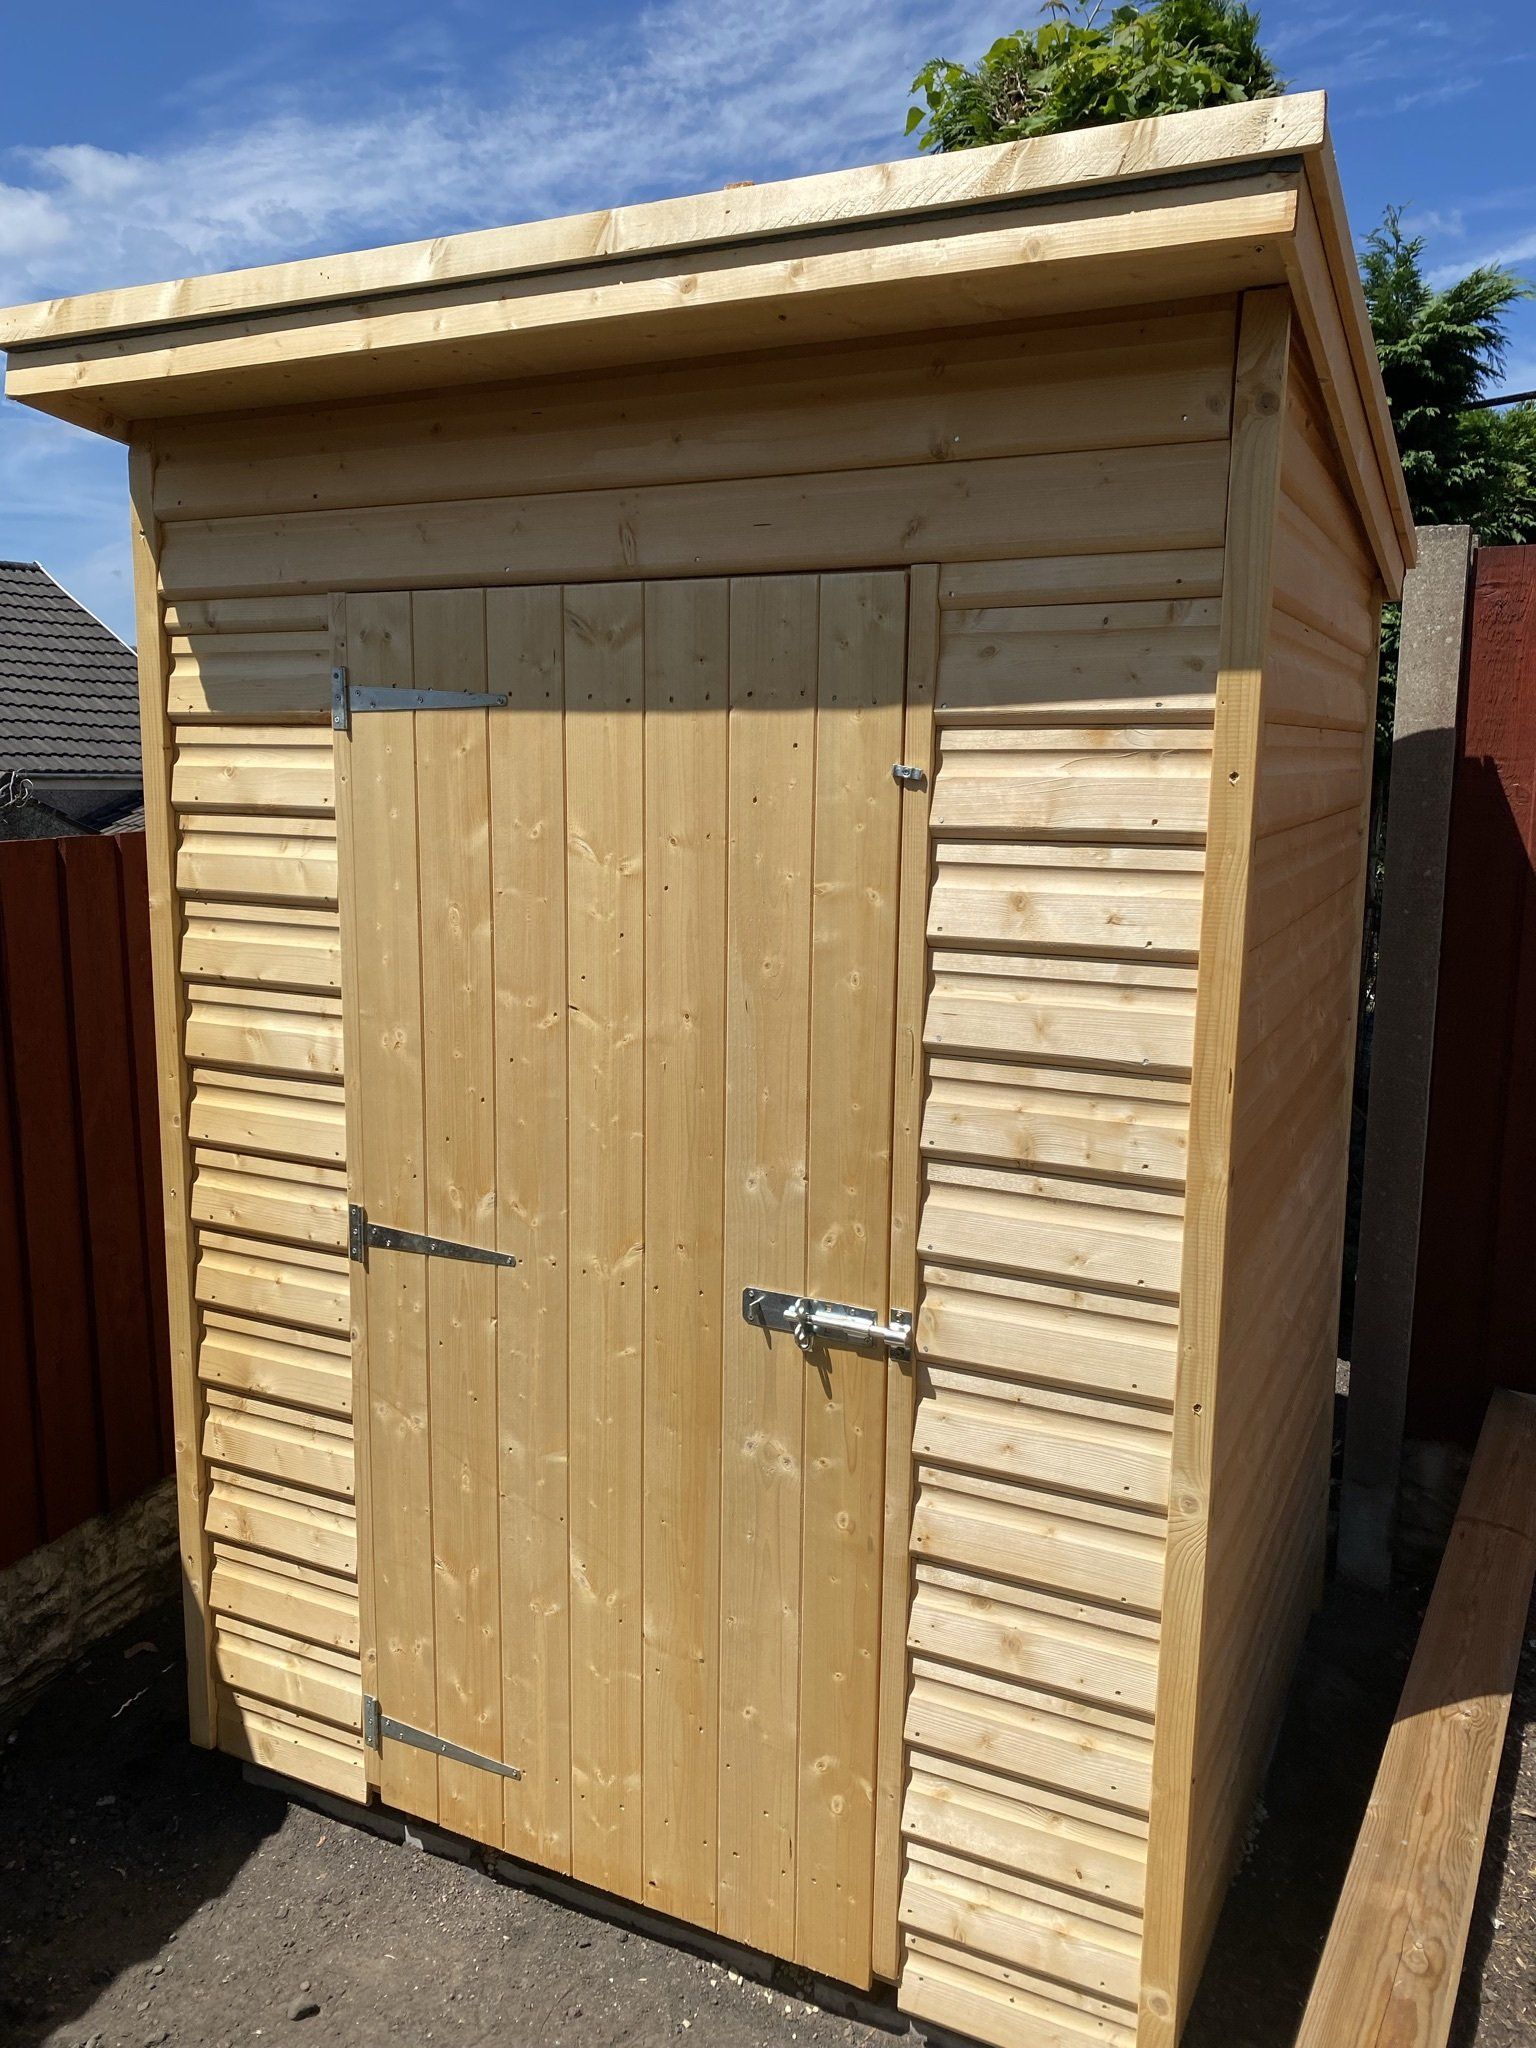 5' x 4' Shed with door on the 5' side and the roof sloping back. No windows